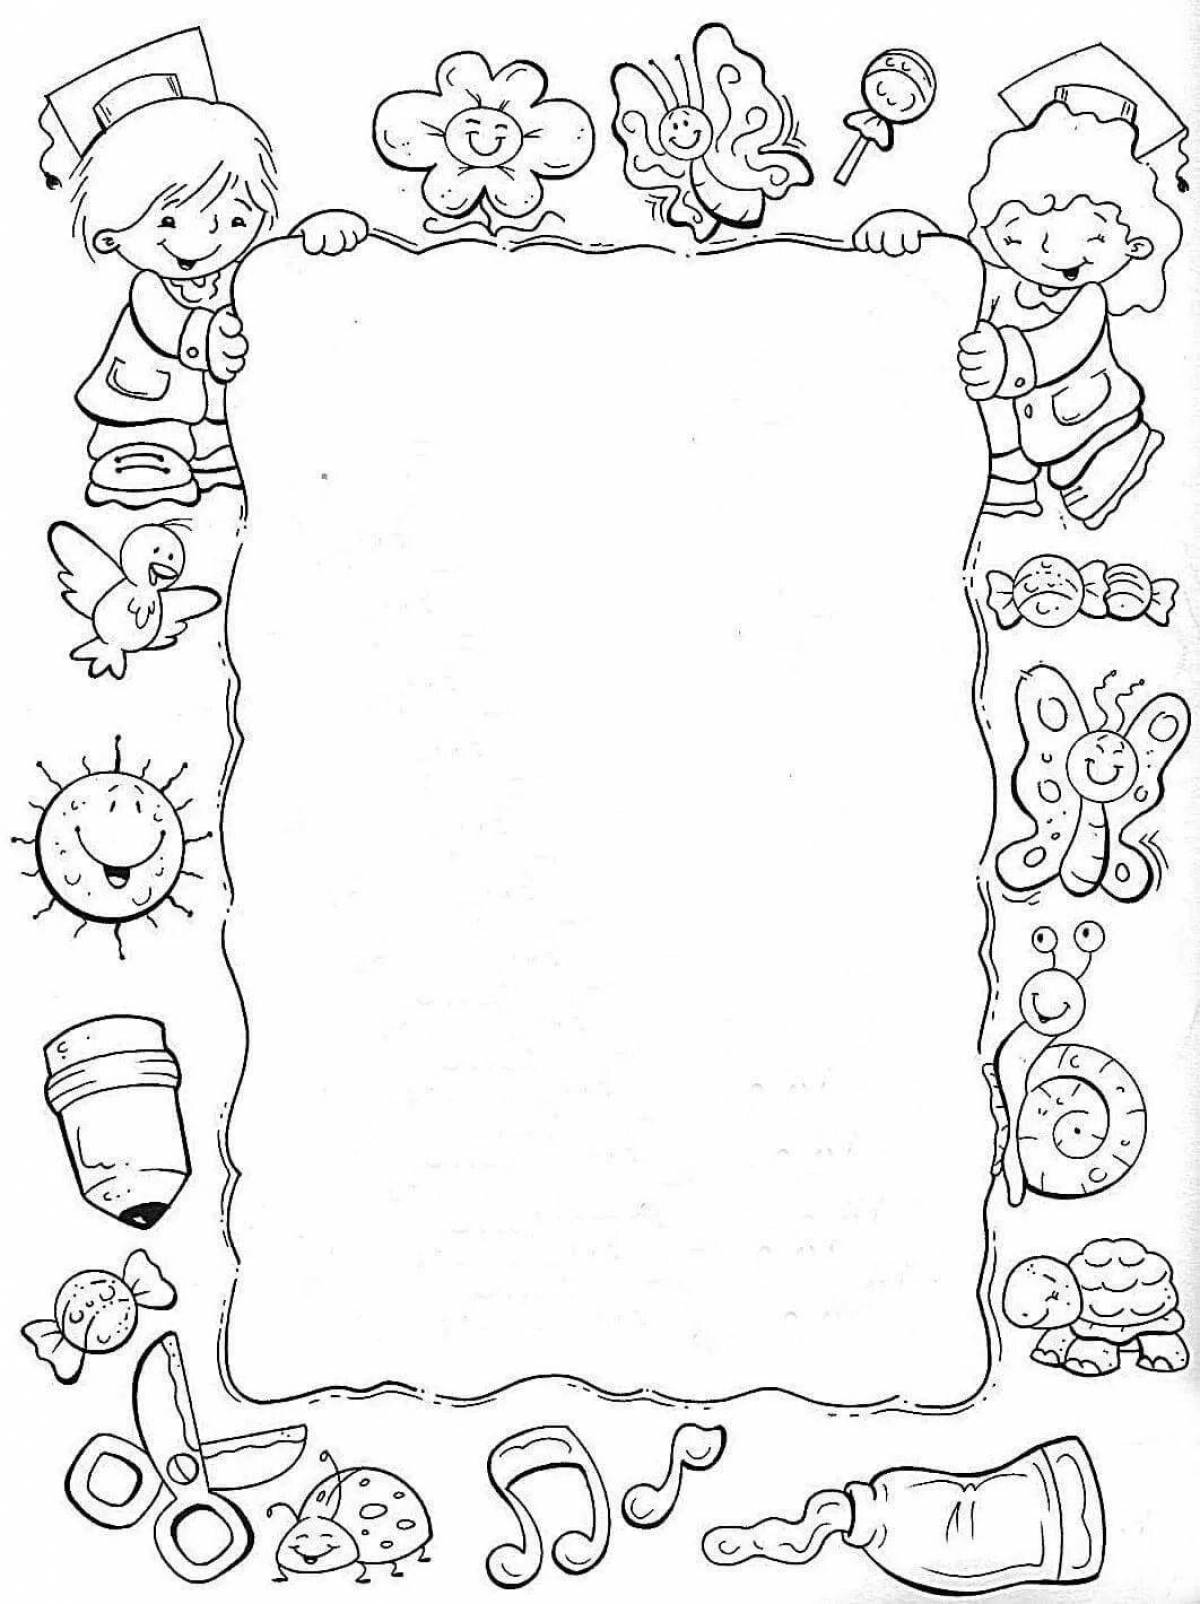 A fun coloring frame for preschoolers